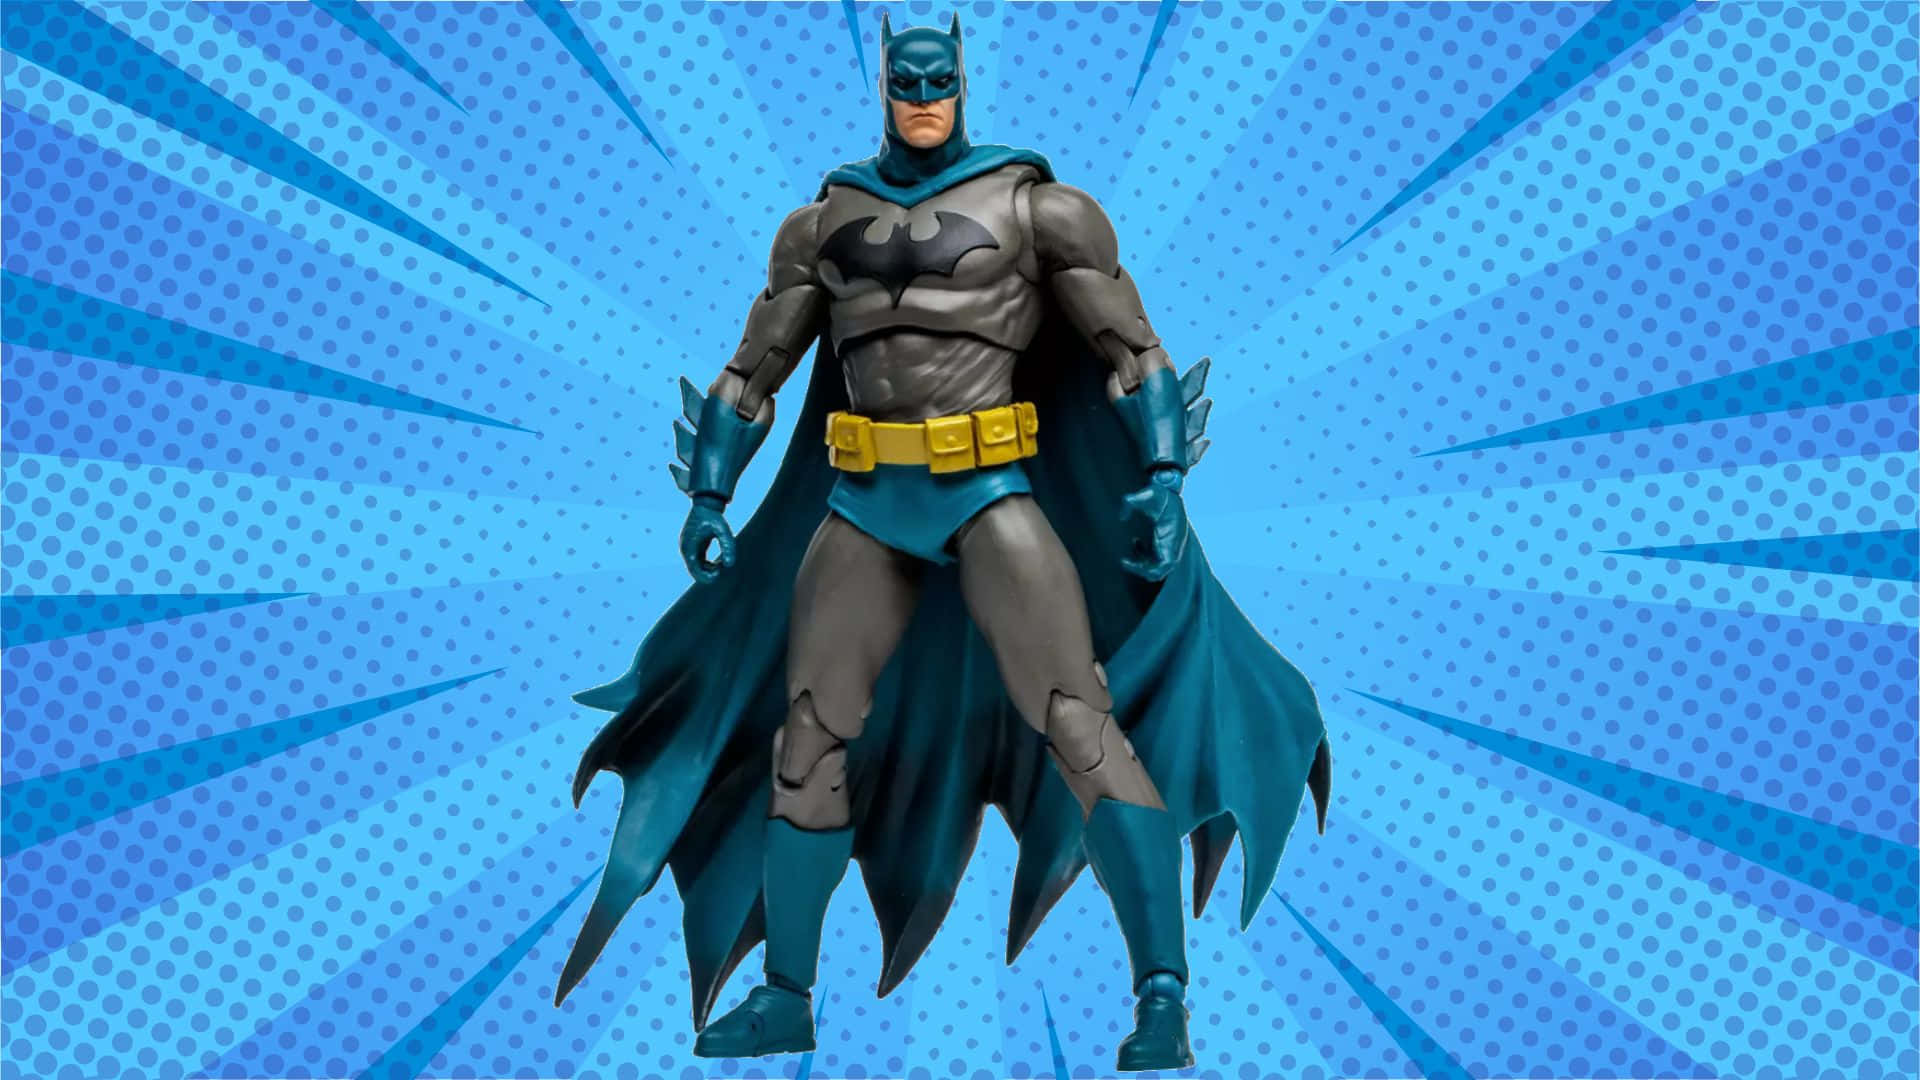 Batman In Blue And Blue Background